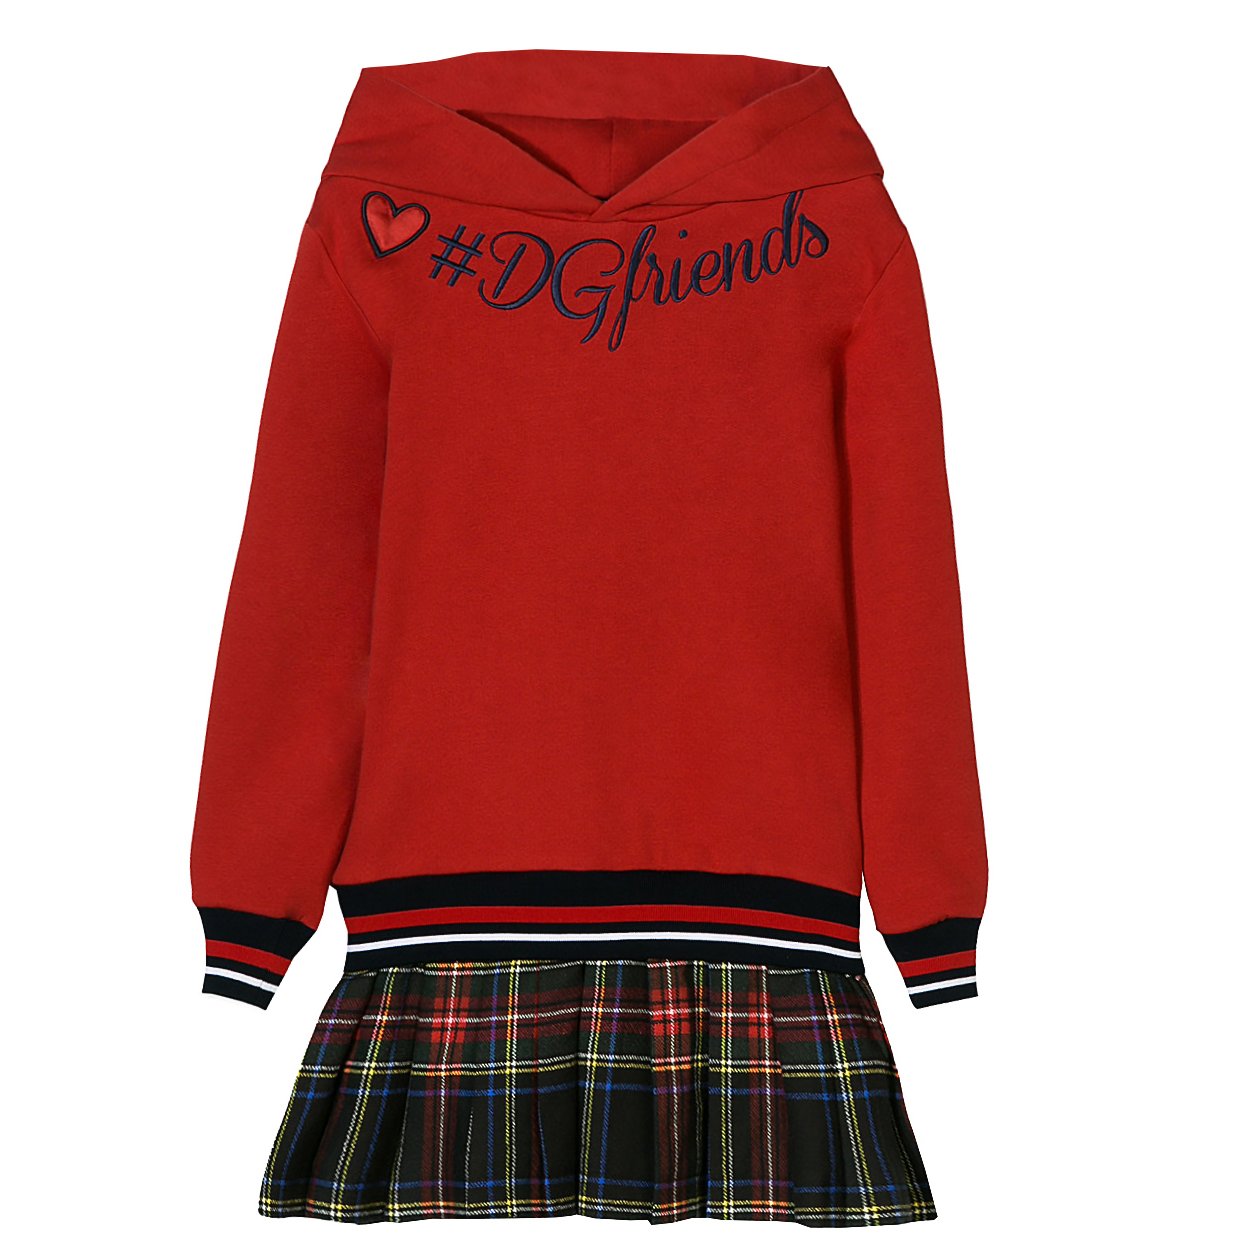 Kids-Girls Back to School Long Sleeve Dress-Red and Black